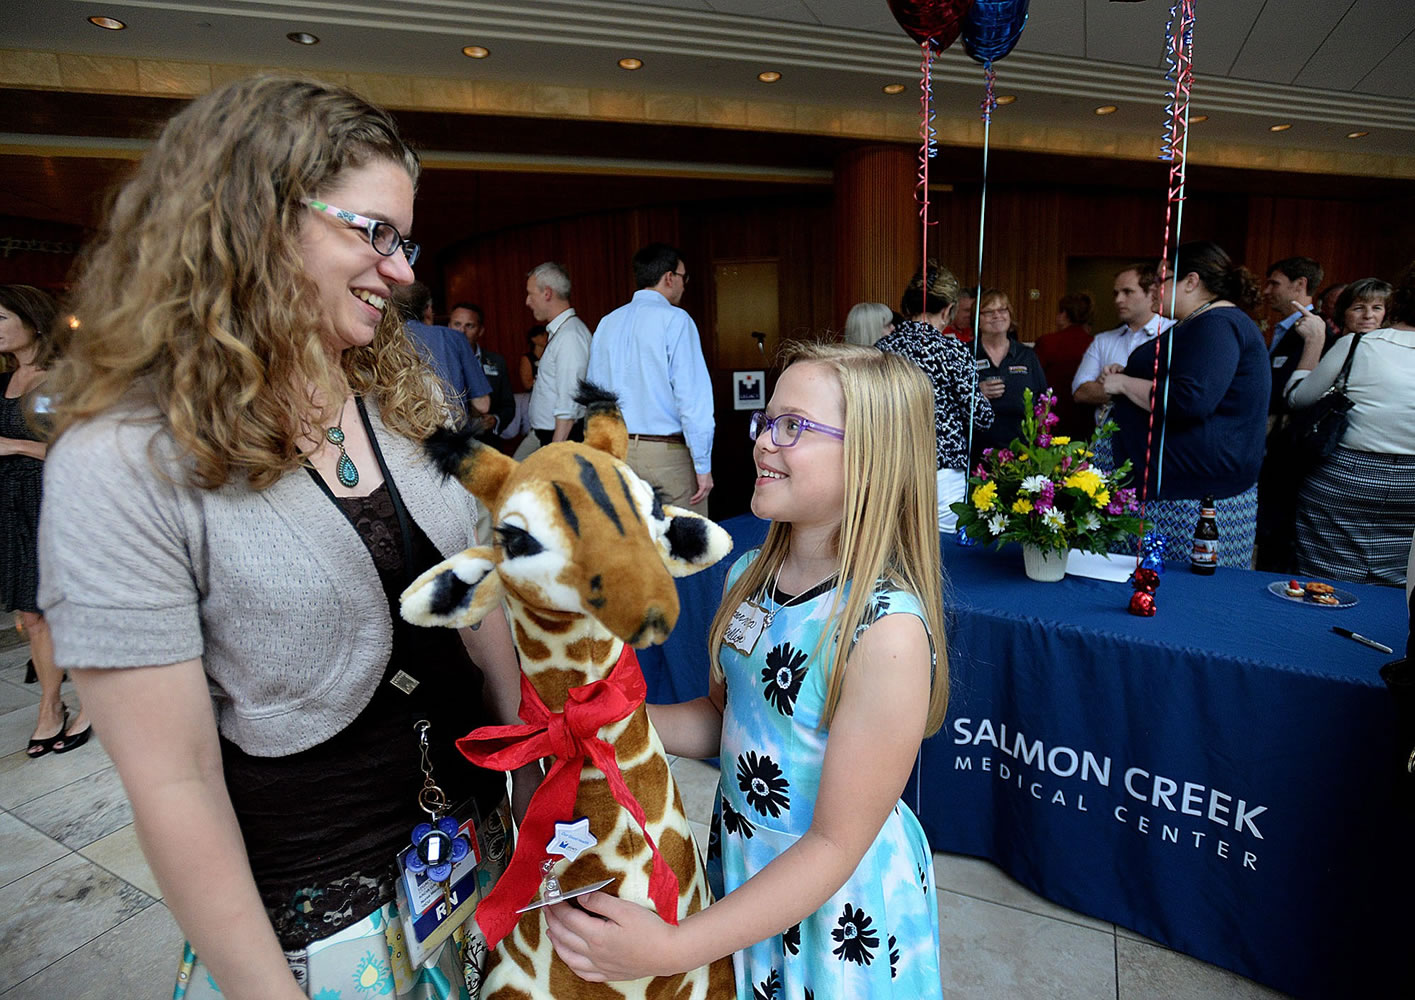 Kacia Gauthier, neonatal intensive care unit manager at Legacy Salmon Creek Medical Center, left, wishes Breanna Bullion of La Center a happy 10th birthday after presenting the girl with a stuffed giraffe from the hospital staff. Breanna was the first patient at the Salmon Creek hospital when it opened 10 years ago.